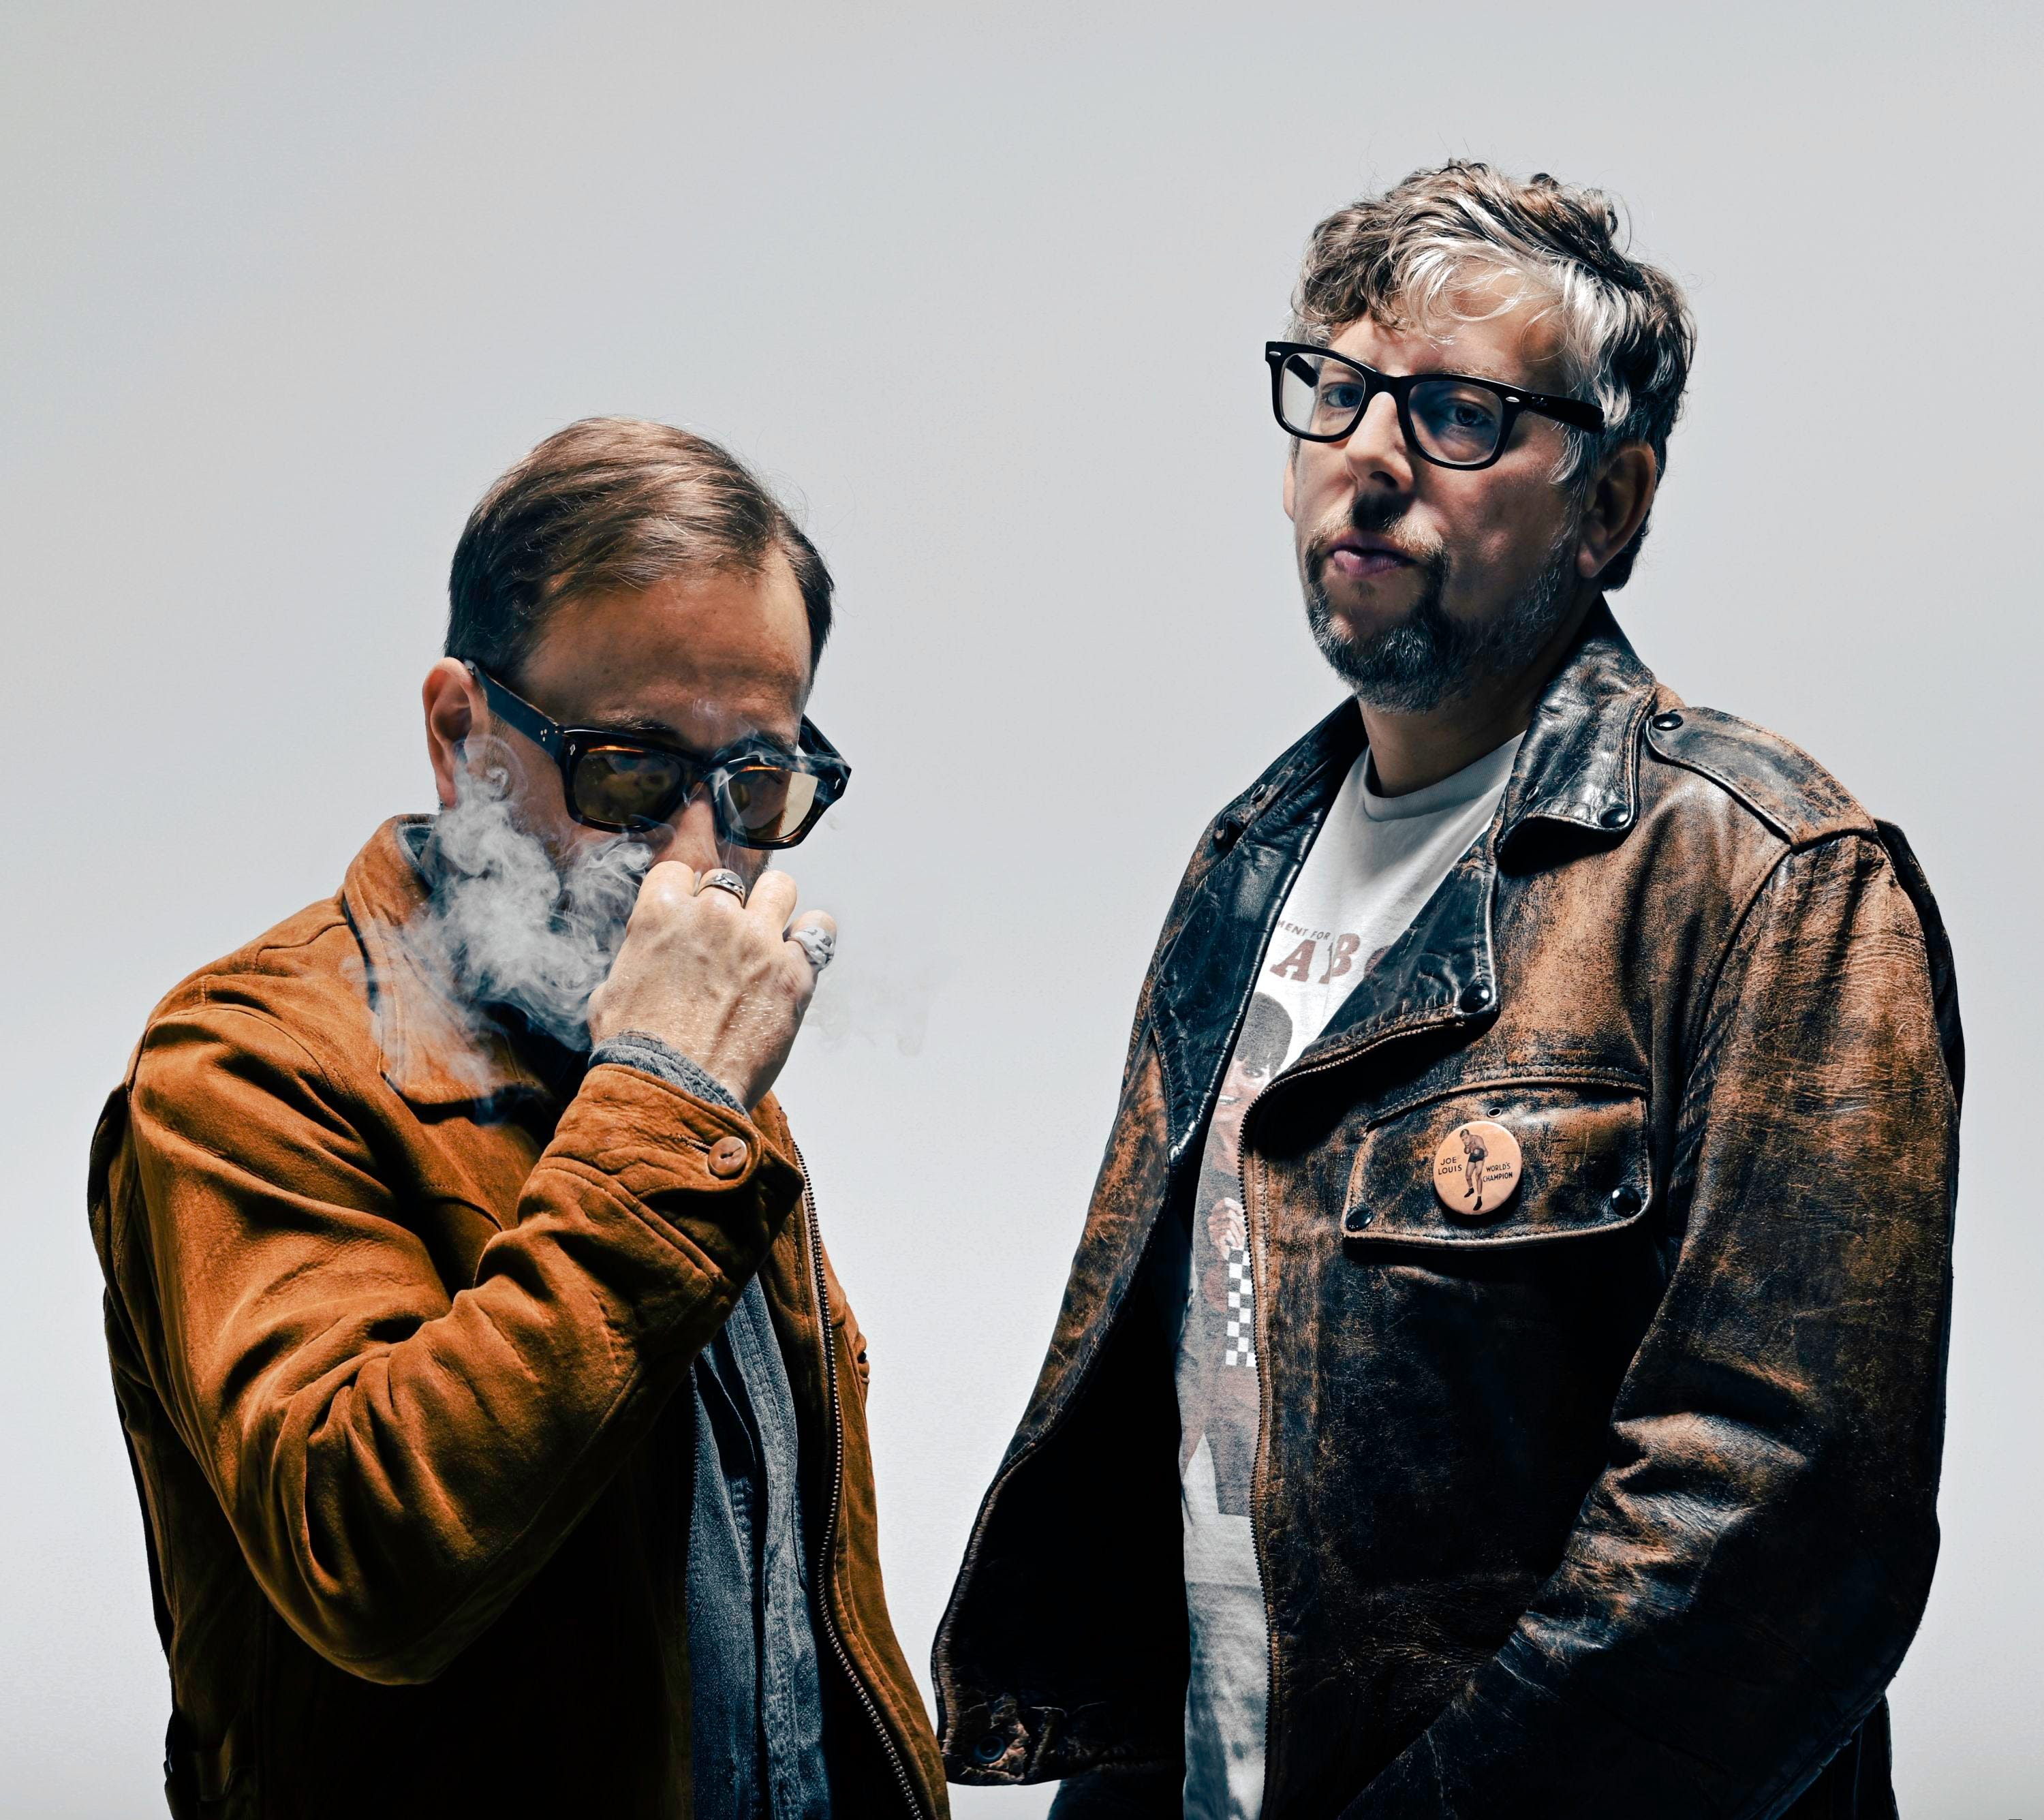 The Black Keys post updates on social media after appearing to cancel US tour dates